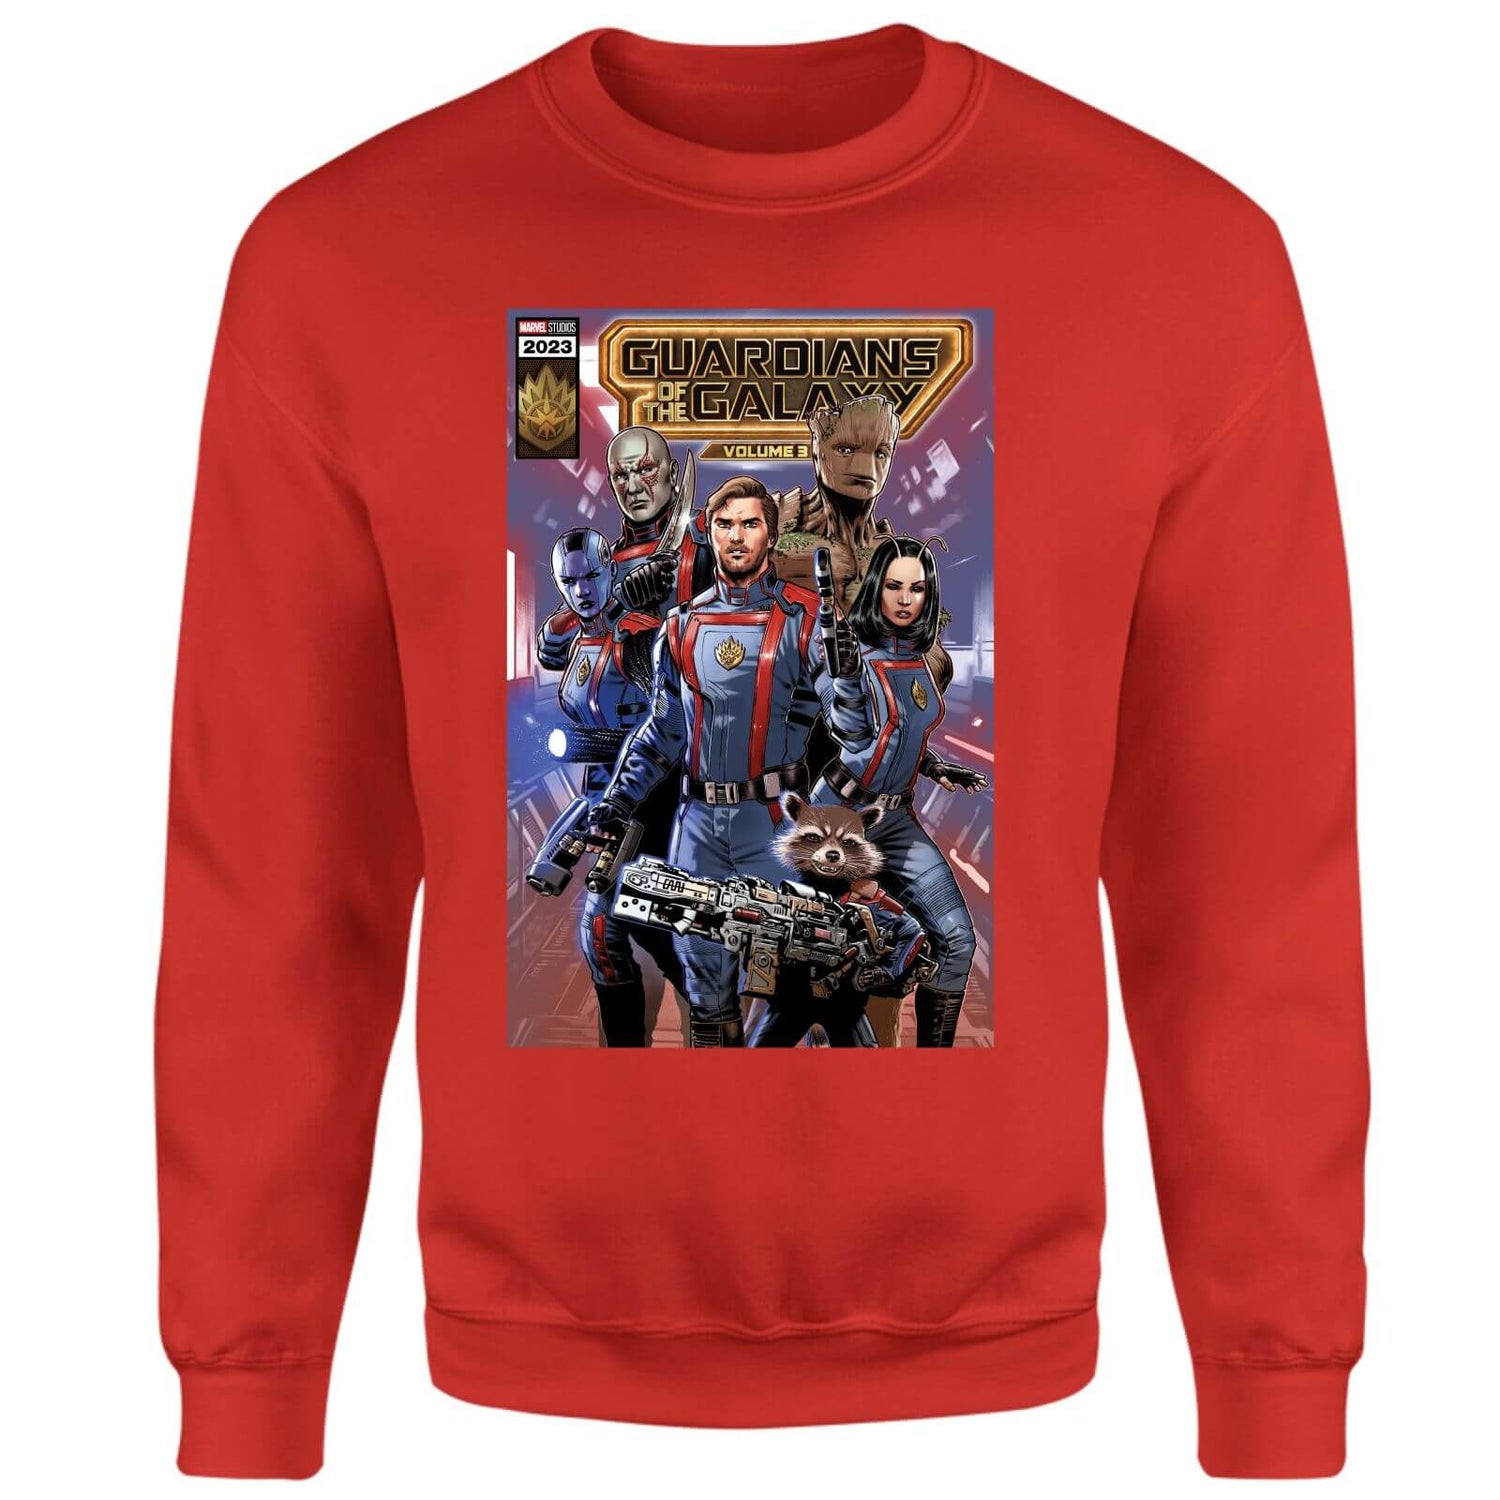 Guardians of the Galaxy Photo Comic Cover Sweatshirt - Red